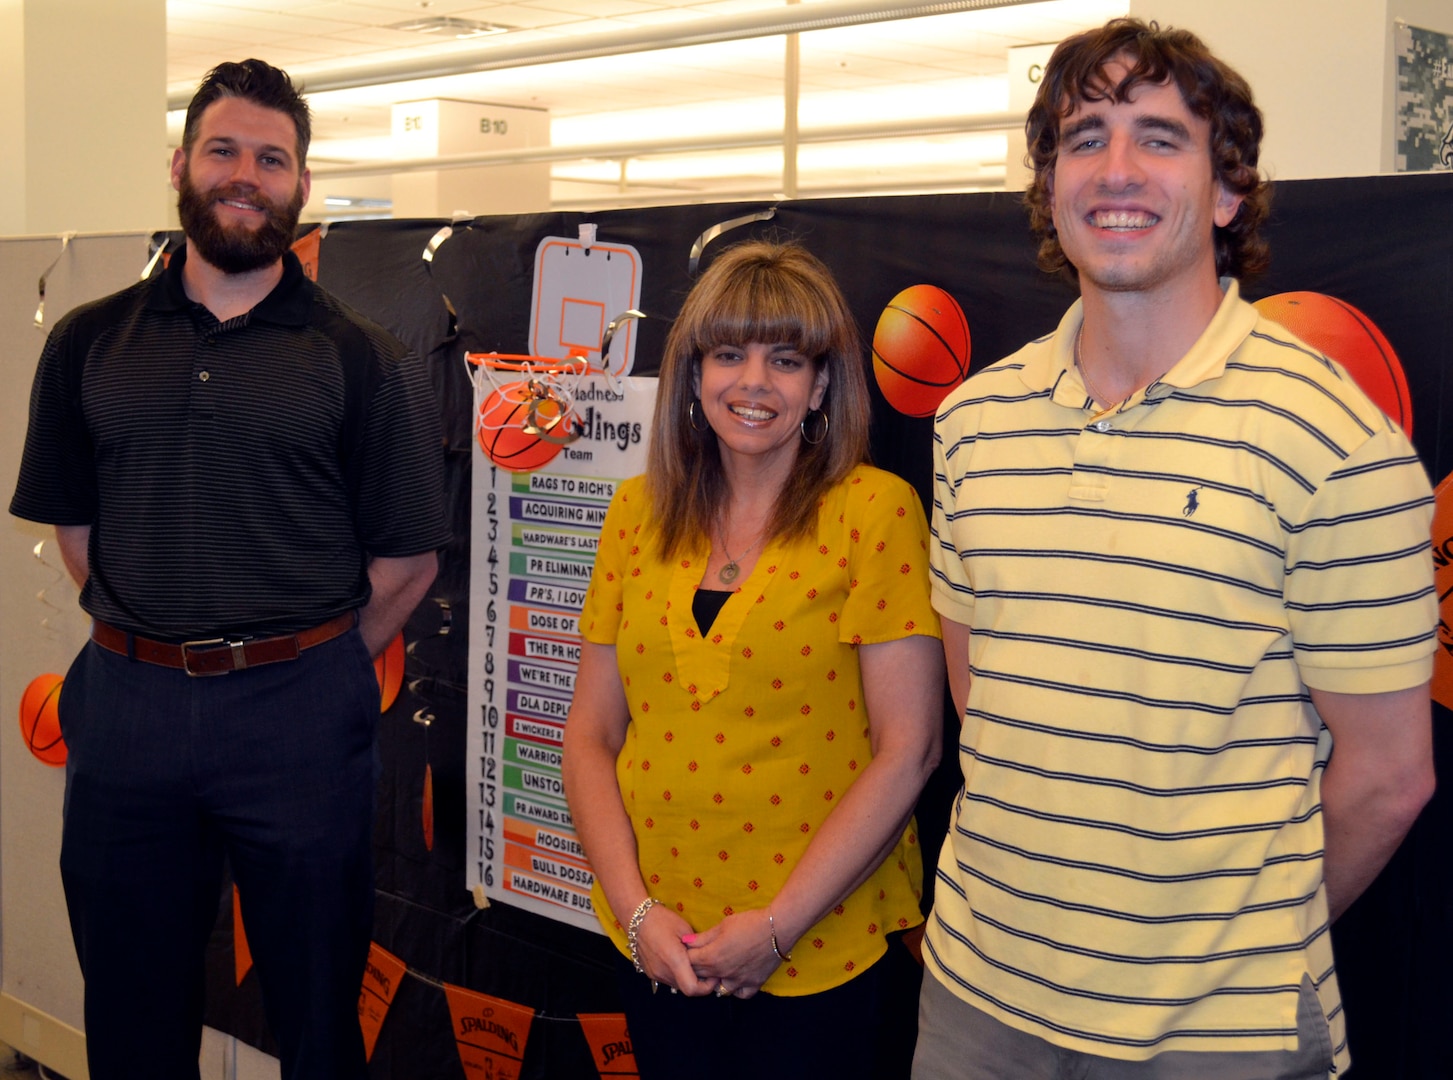 Teammates Matt Eckenrode, Cynthia Linsalata and Jonathan Ferrante, employees from DLA Troop Support Industrial Hardware and members of PR Madness’ second place finishers, “Acquiring Minds,” pose in front of this year’s PR Madness leaderboard April 30, 2019 in Philadelphia.